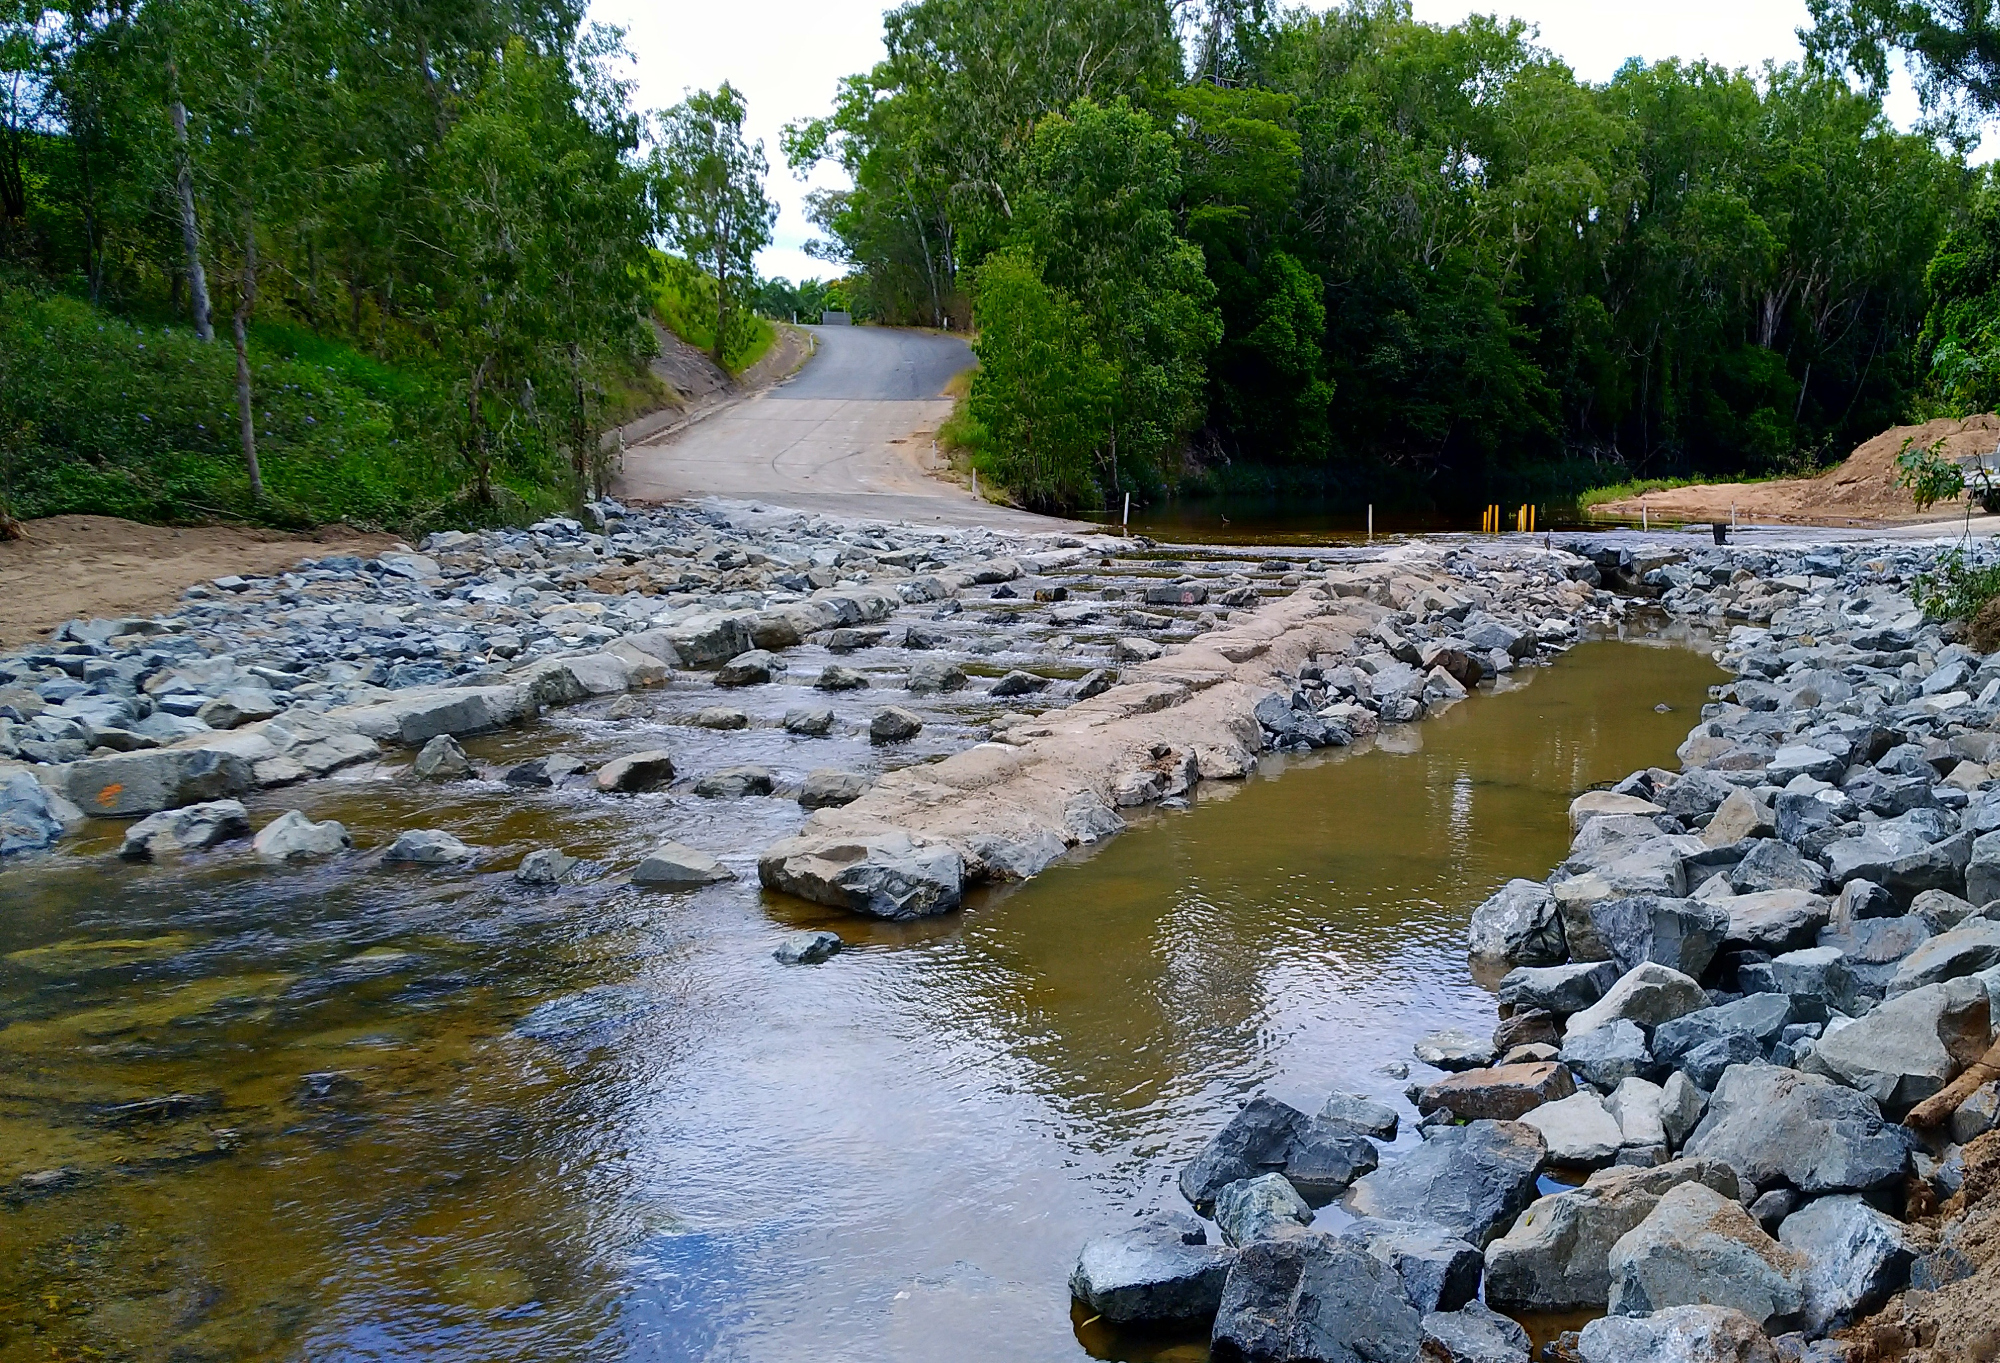 Lateral ridge rock ramp fishway built into the tailwater with low flow fish passage channel down the centre and high flow fish passage on both banks, Palm Tree Road, Sandy Creek, Queensland Photo by Matthew Moore